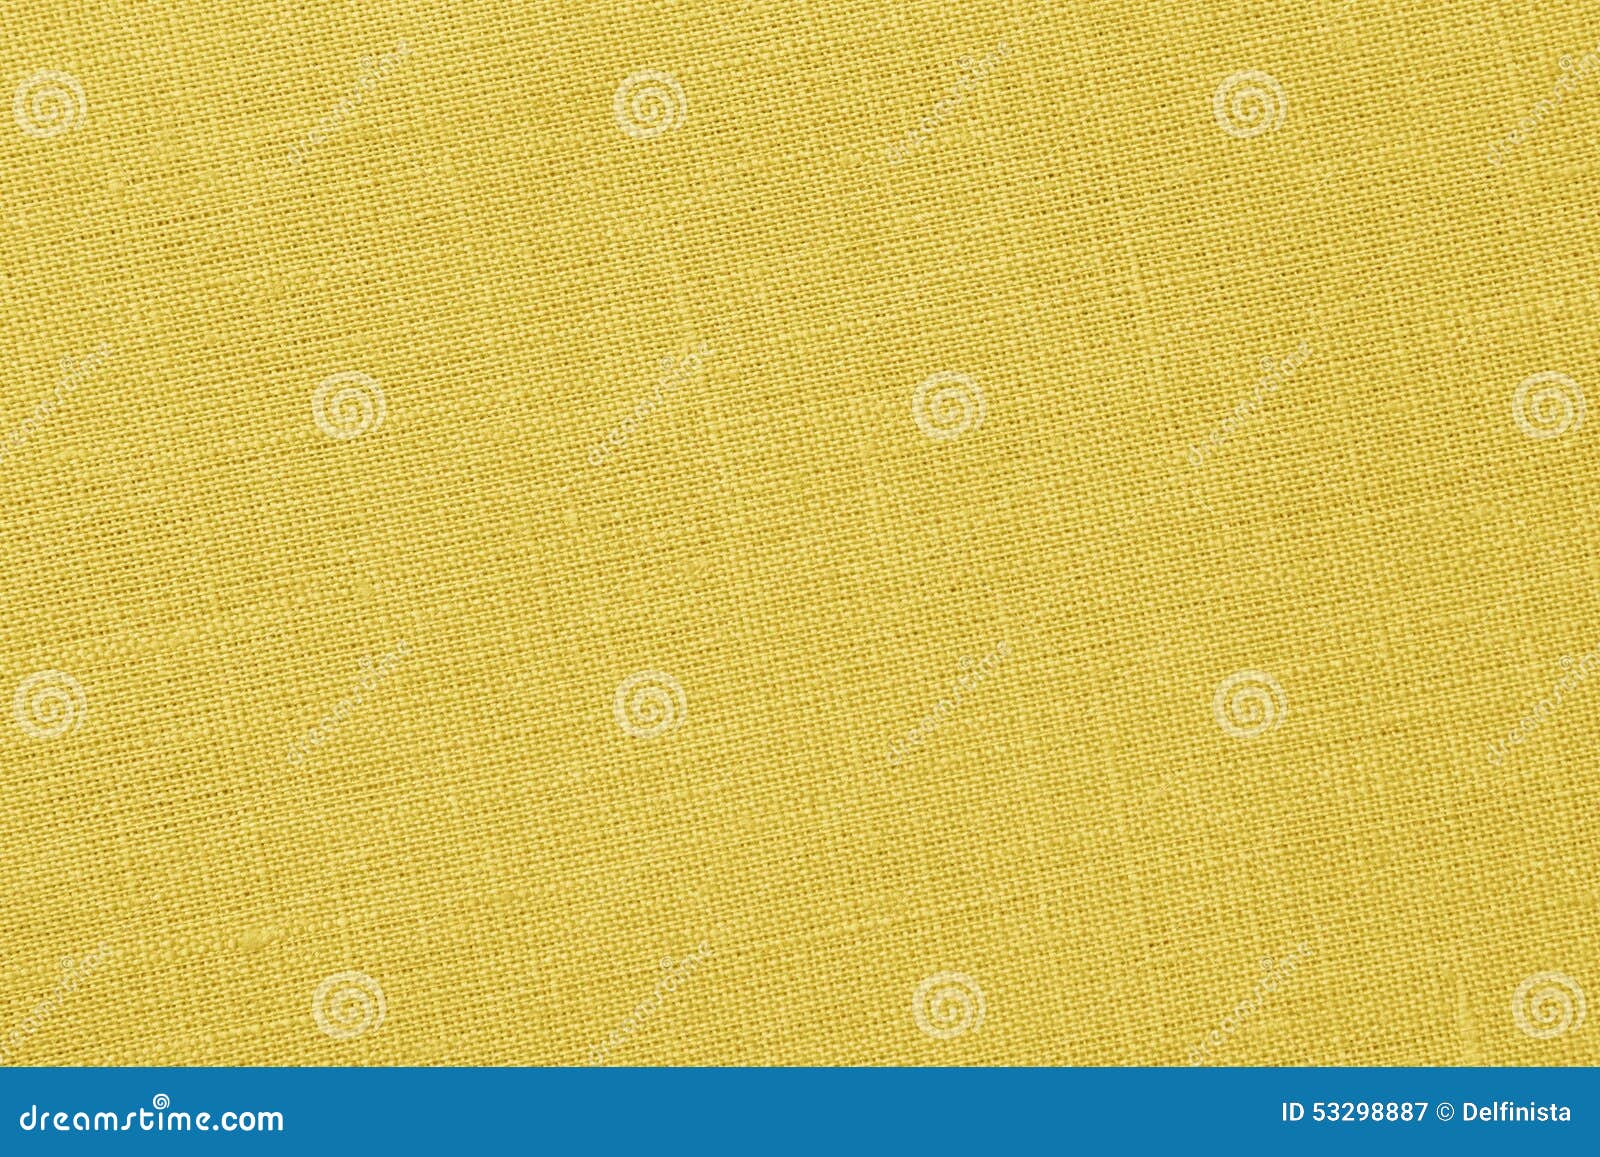 Yellow Background - Linen Canvas - Stock Photo Stock Image - Image of ...